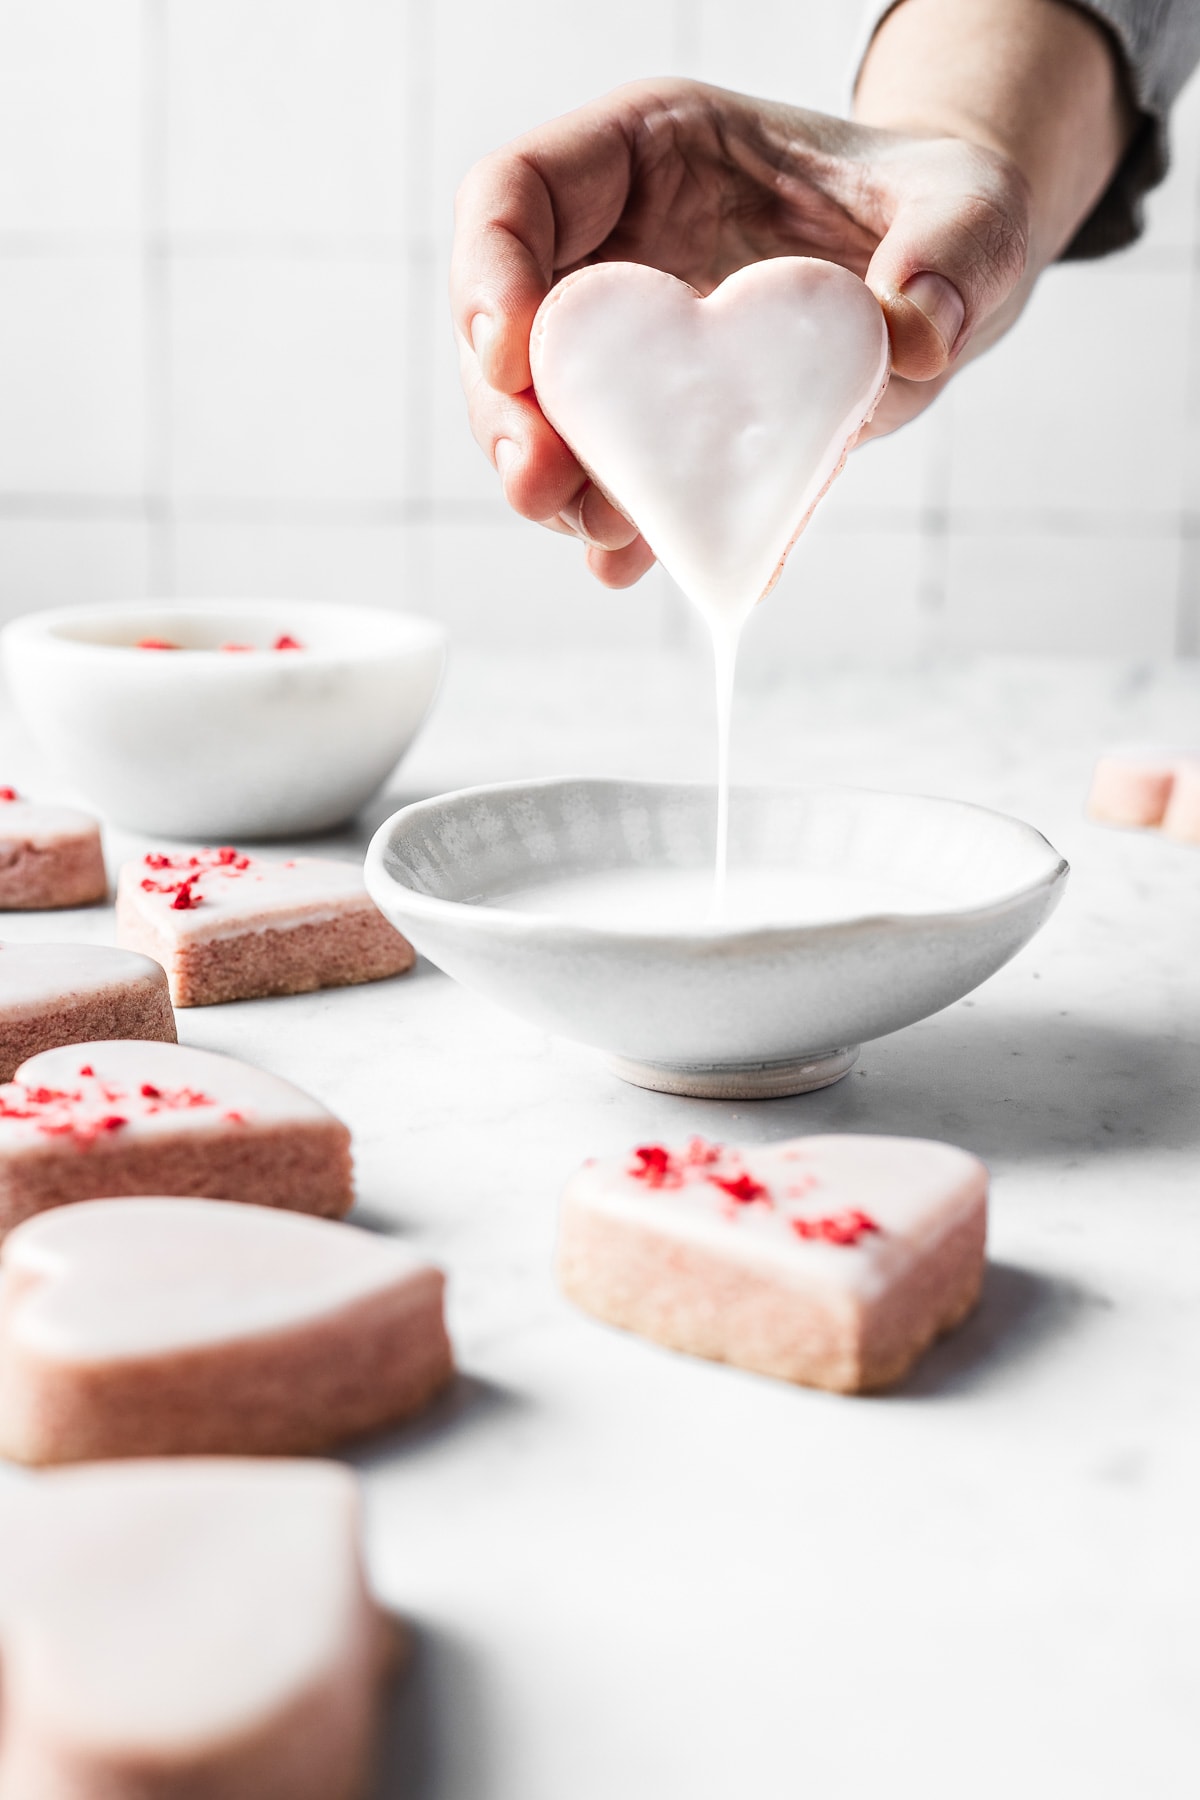 A hand dips a pink shortbread cookie into a white ceramic bowl of glaze. The extra glaze drips back into the bowl. Glazed cookies rest on the marble surface around the bowl. Some have been sprinkled with red freeze dried strawberries.